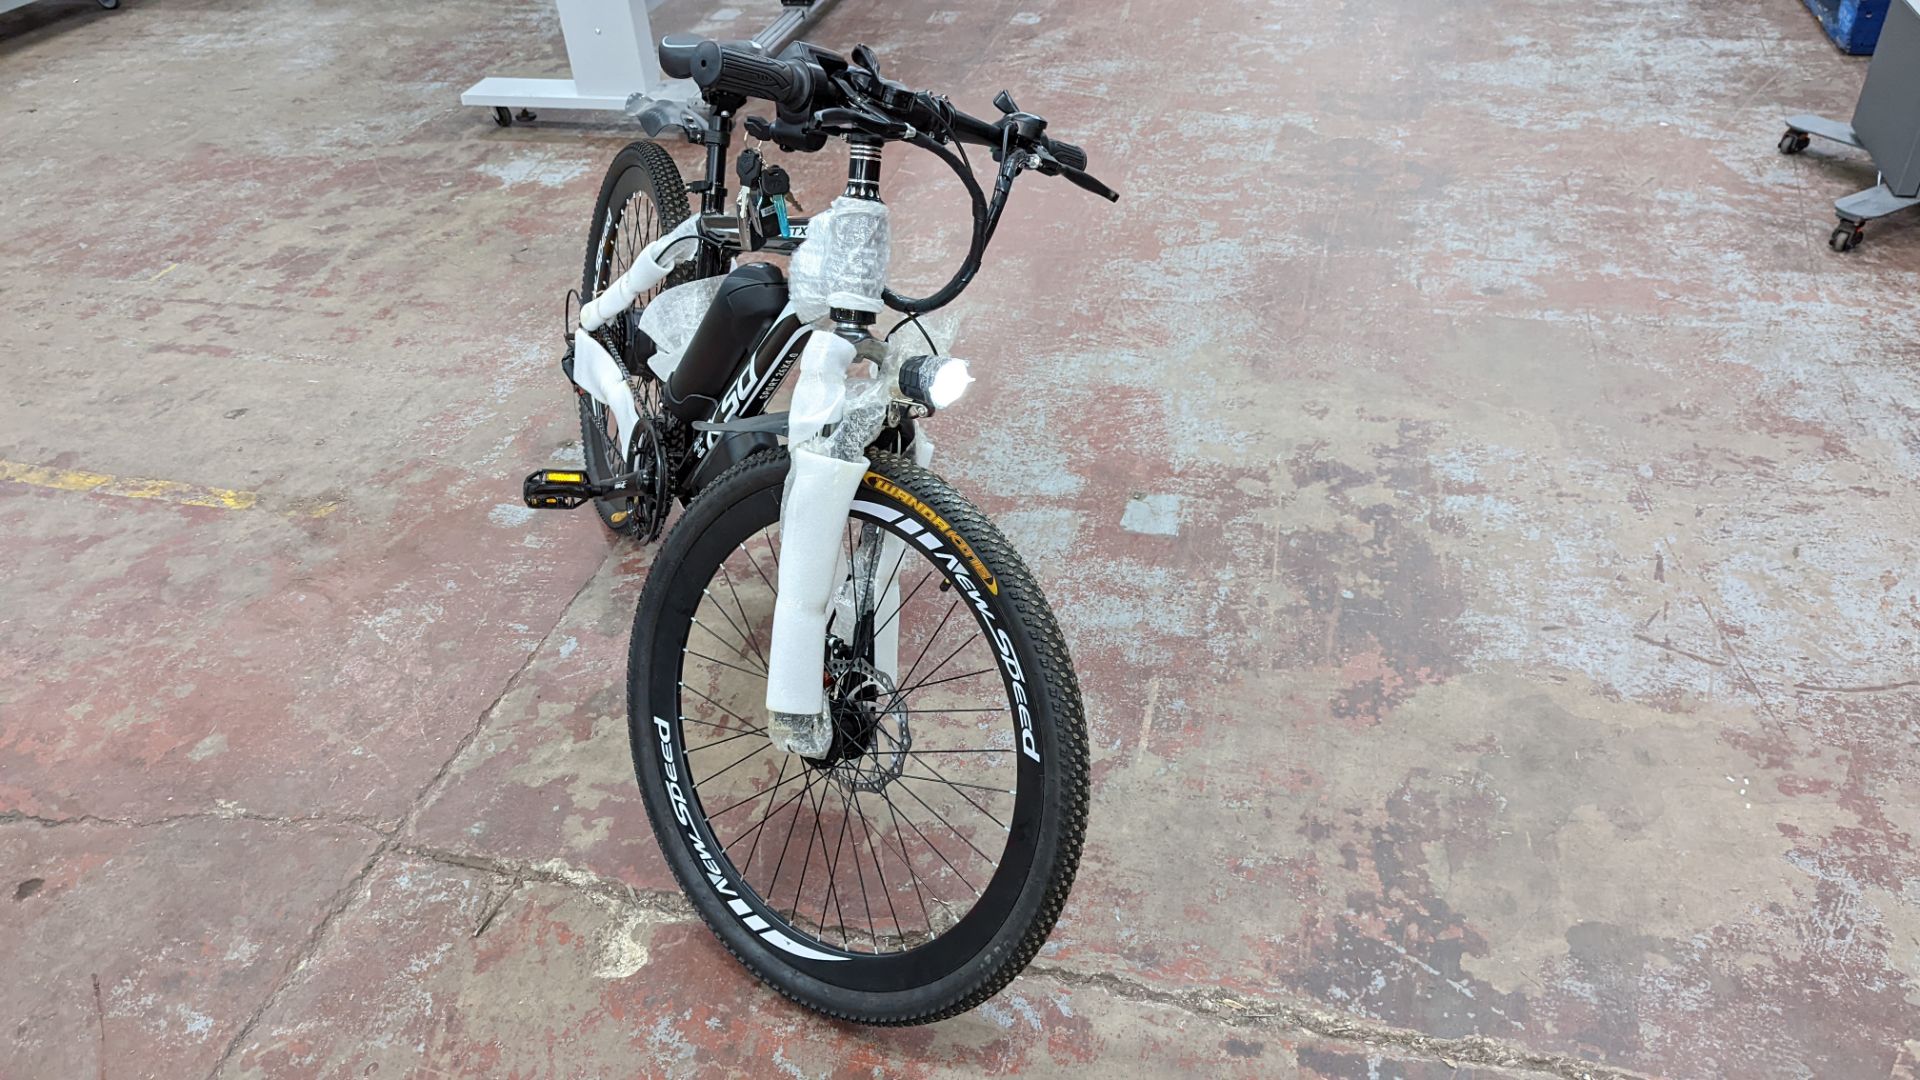 XSD FTX Sport MTB 7.5 Racing electric bike with Shimano Tourney TZ gears. Includes 36v 12AH battery, - Image 5 of 26